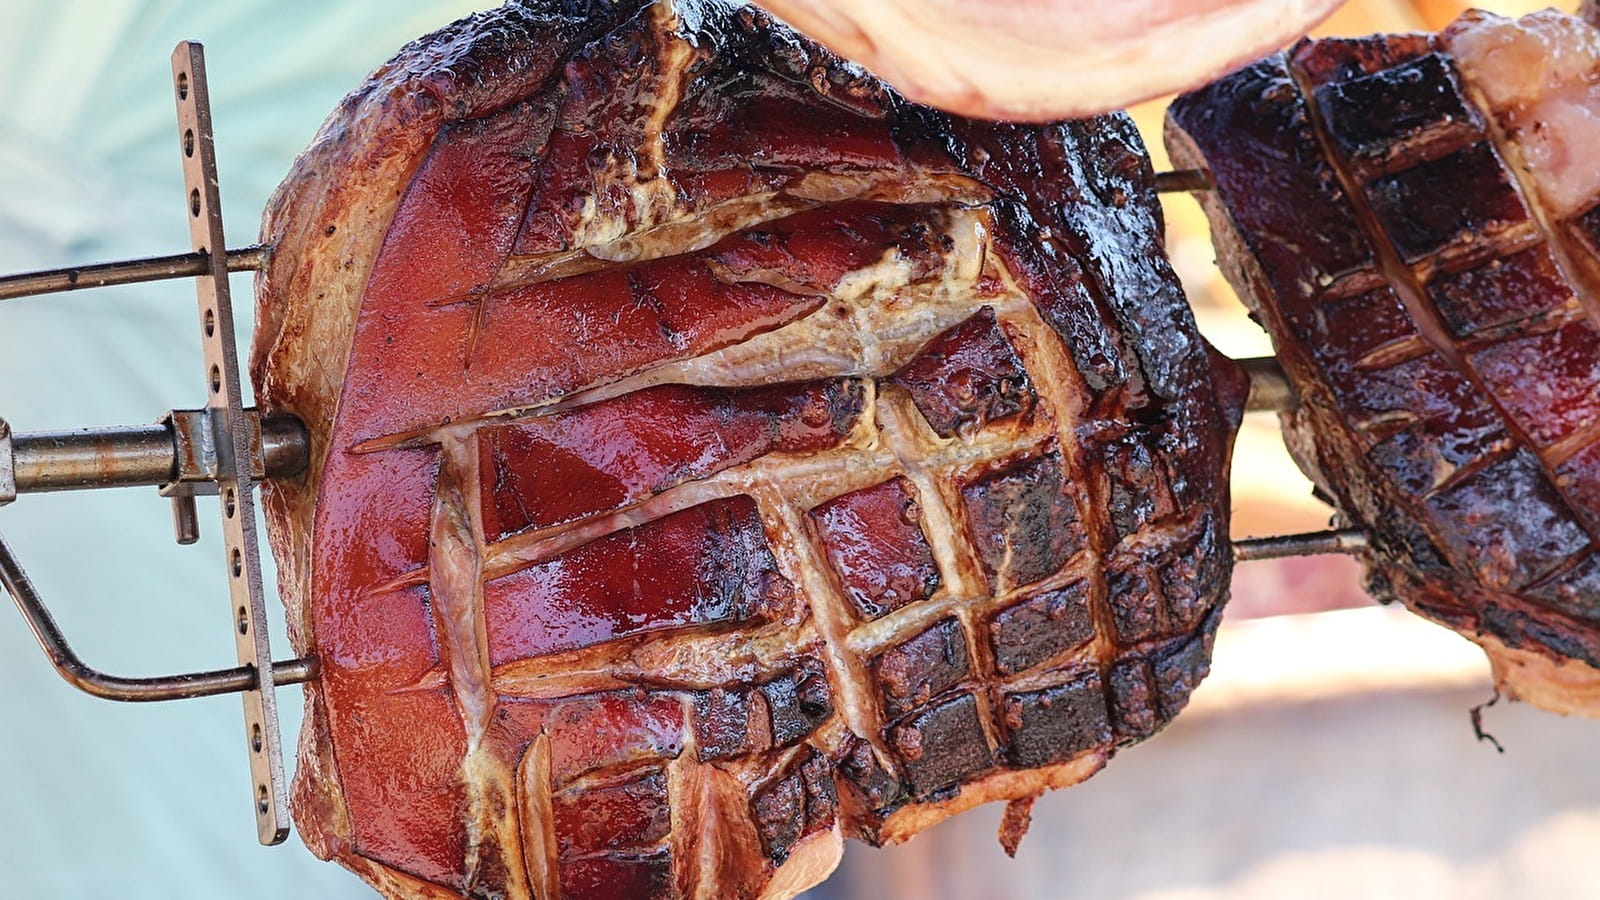 Spit-roasted ham in Sermages